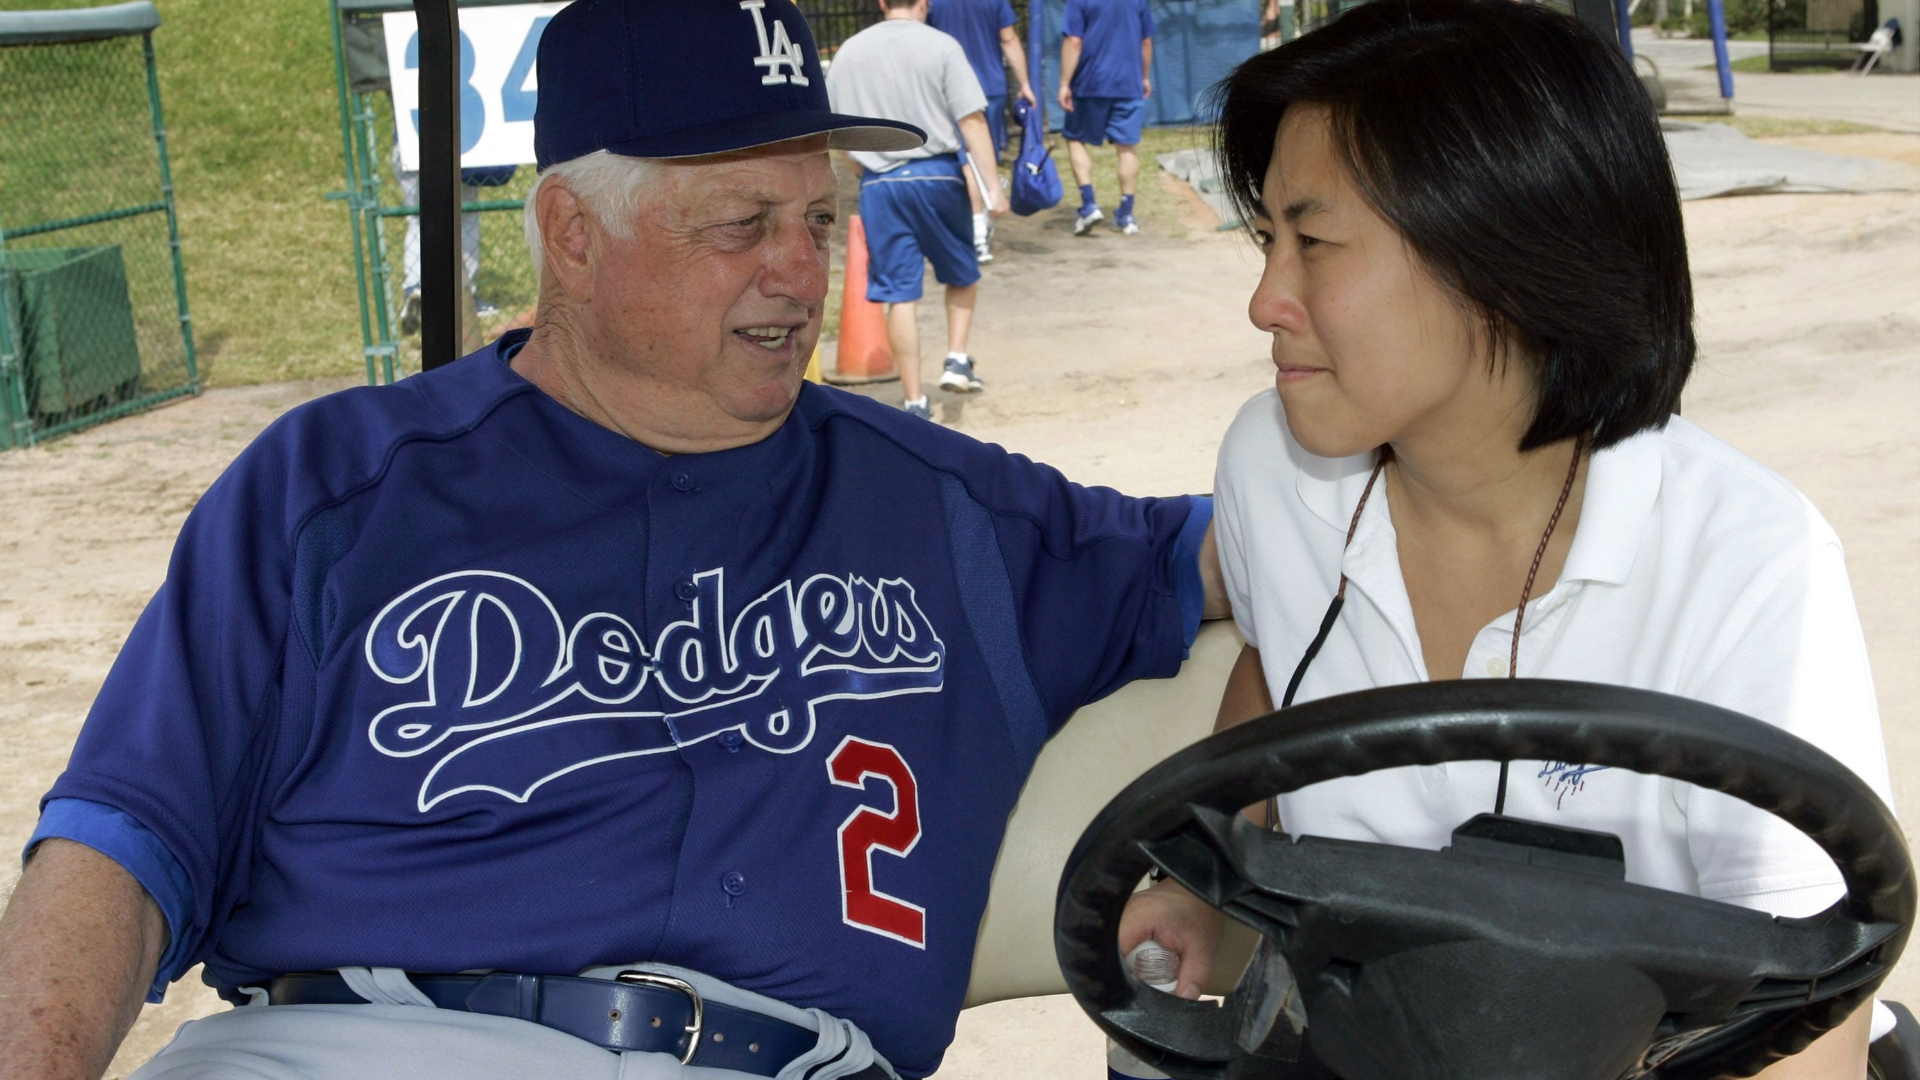 Tommy Lasorda: Baseball Hall of Fame Dodgers manager out of hospital